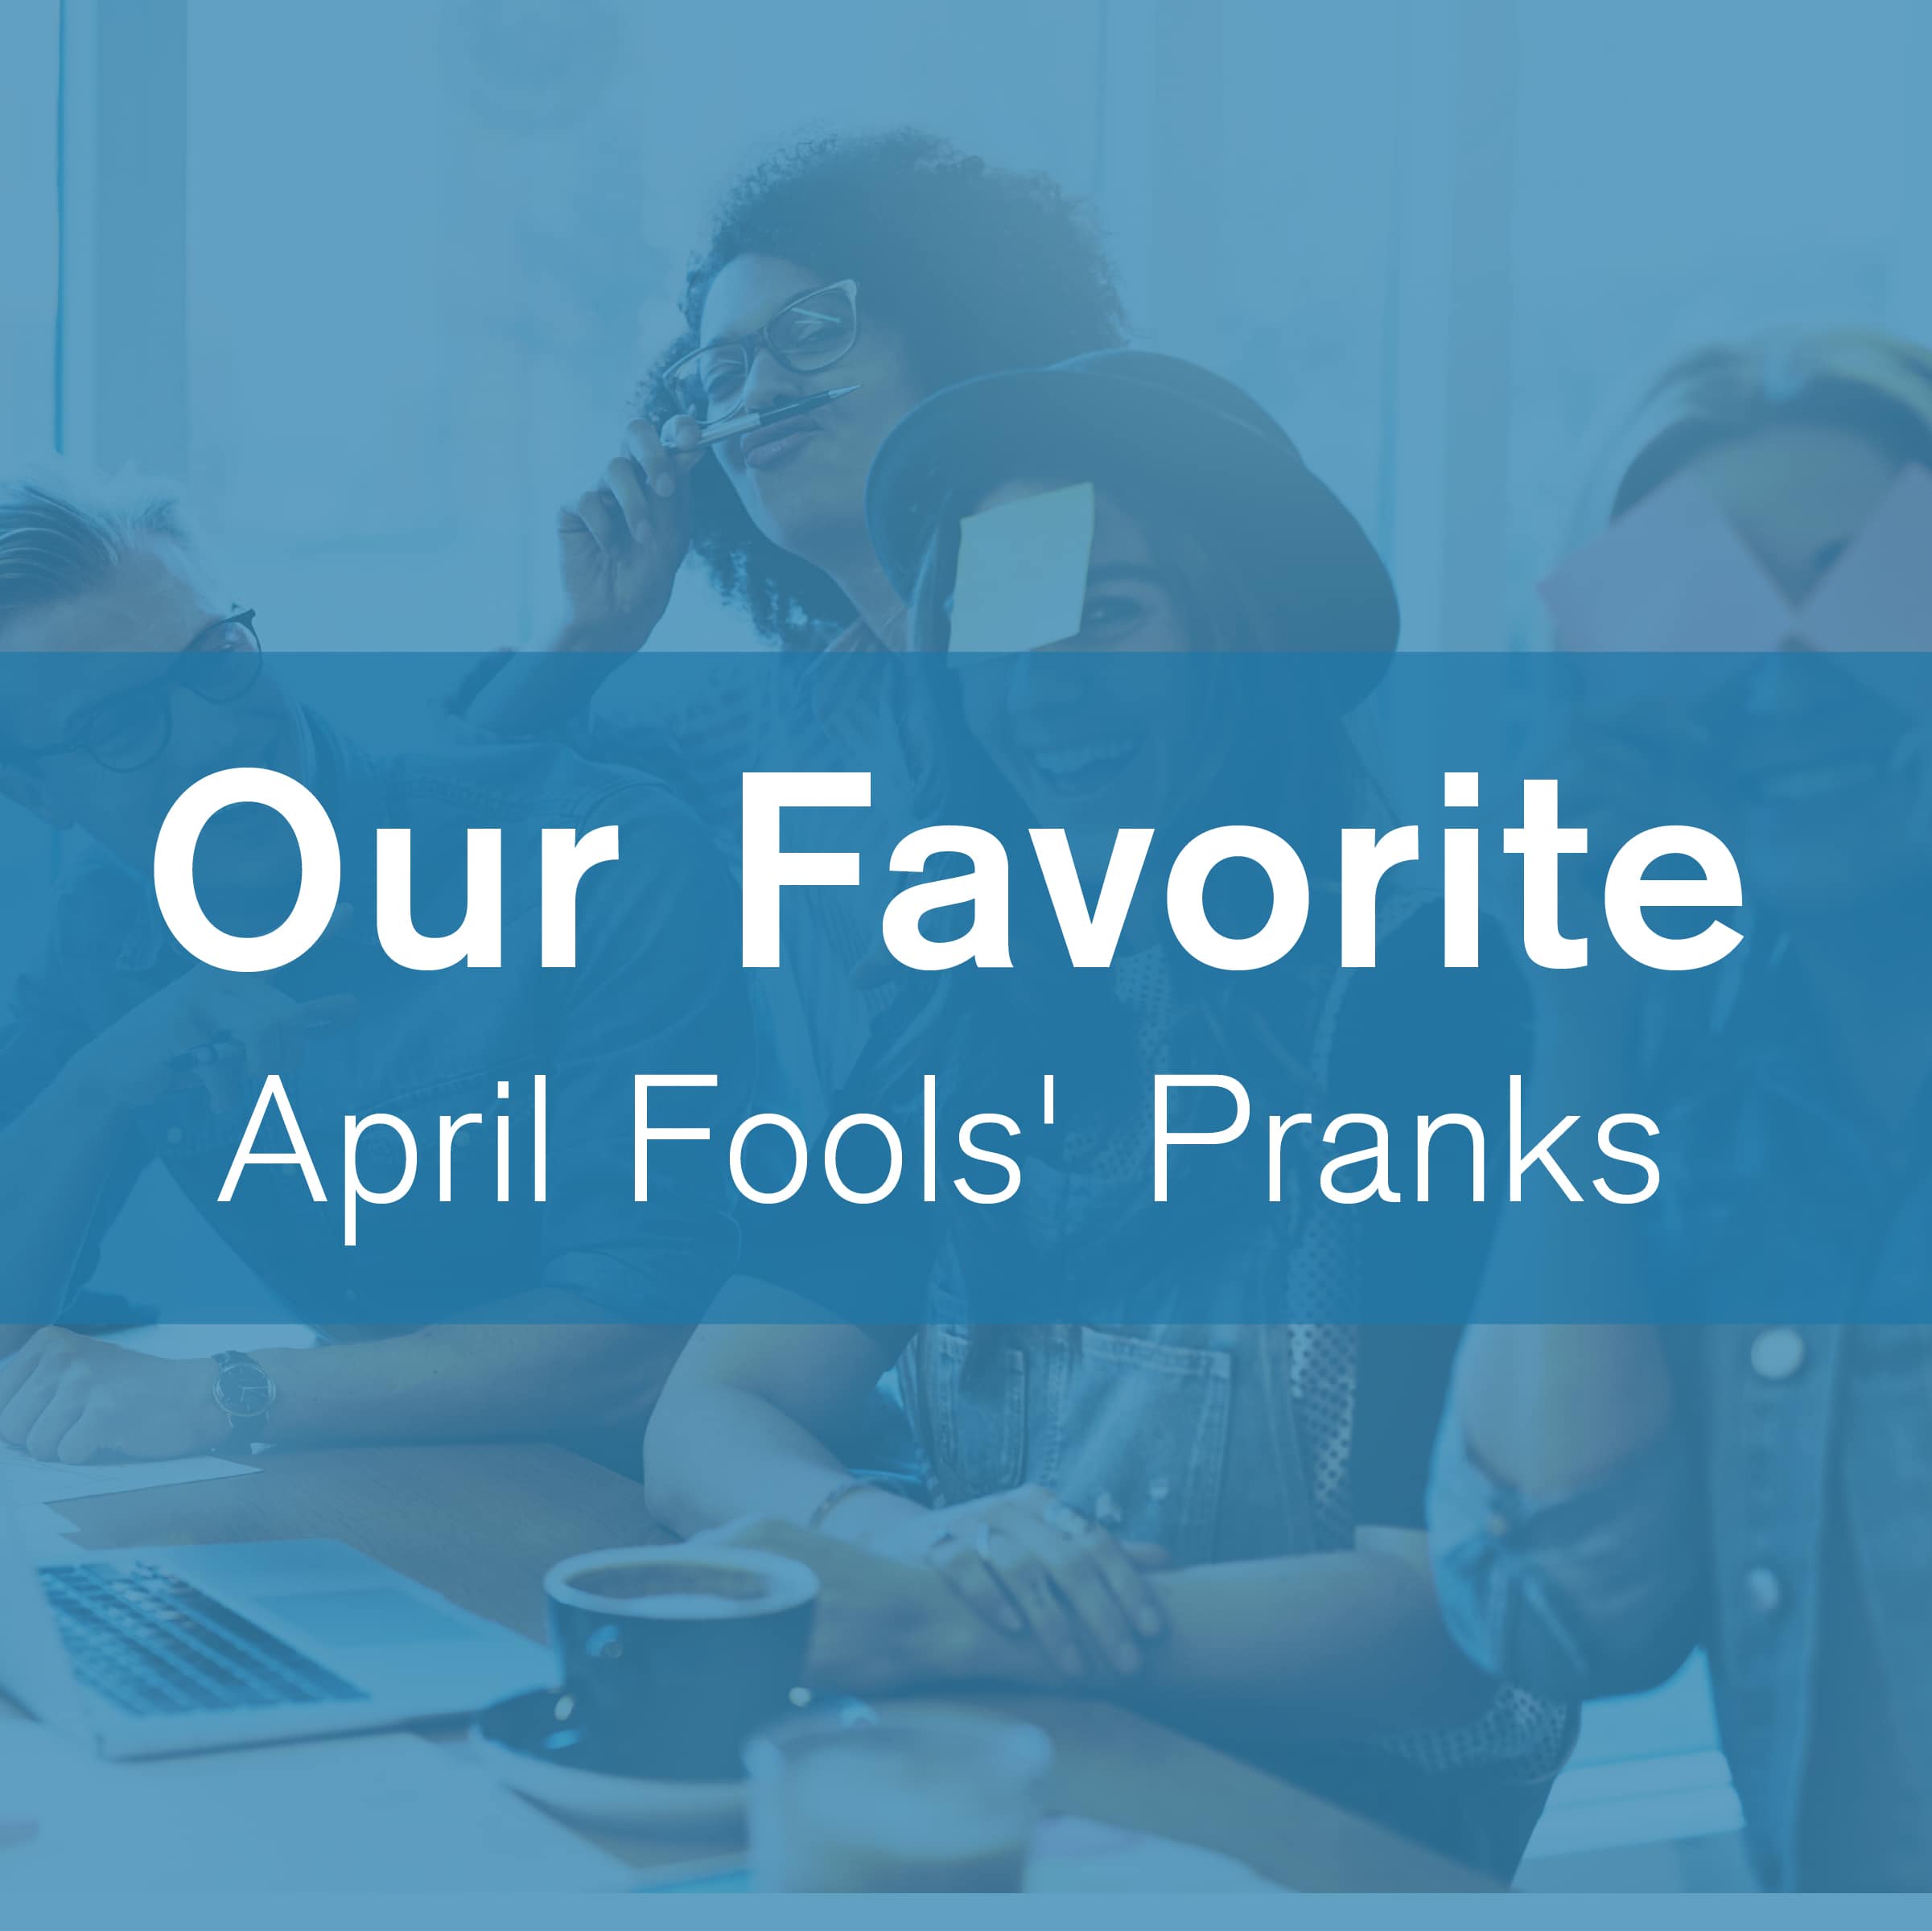 A title card that reads "Our favorite April Fools' Pranks"